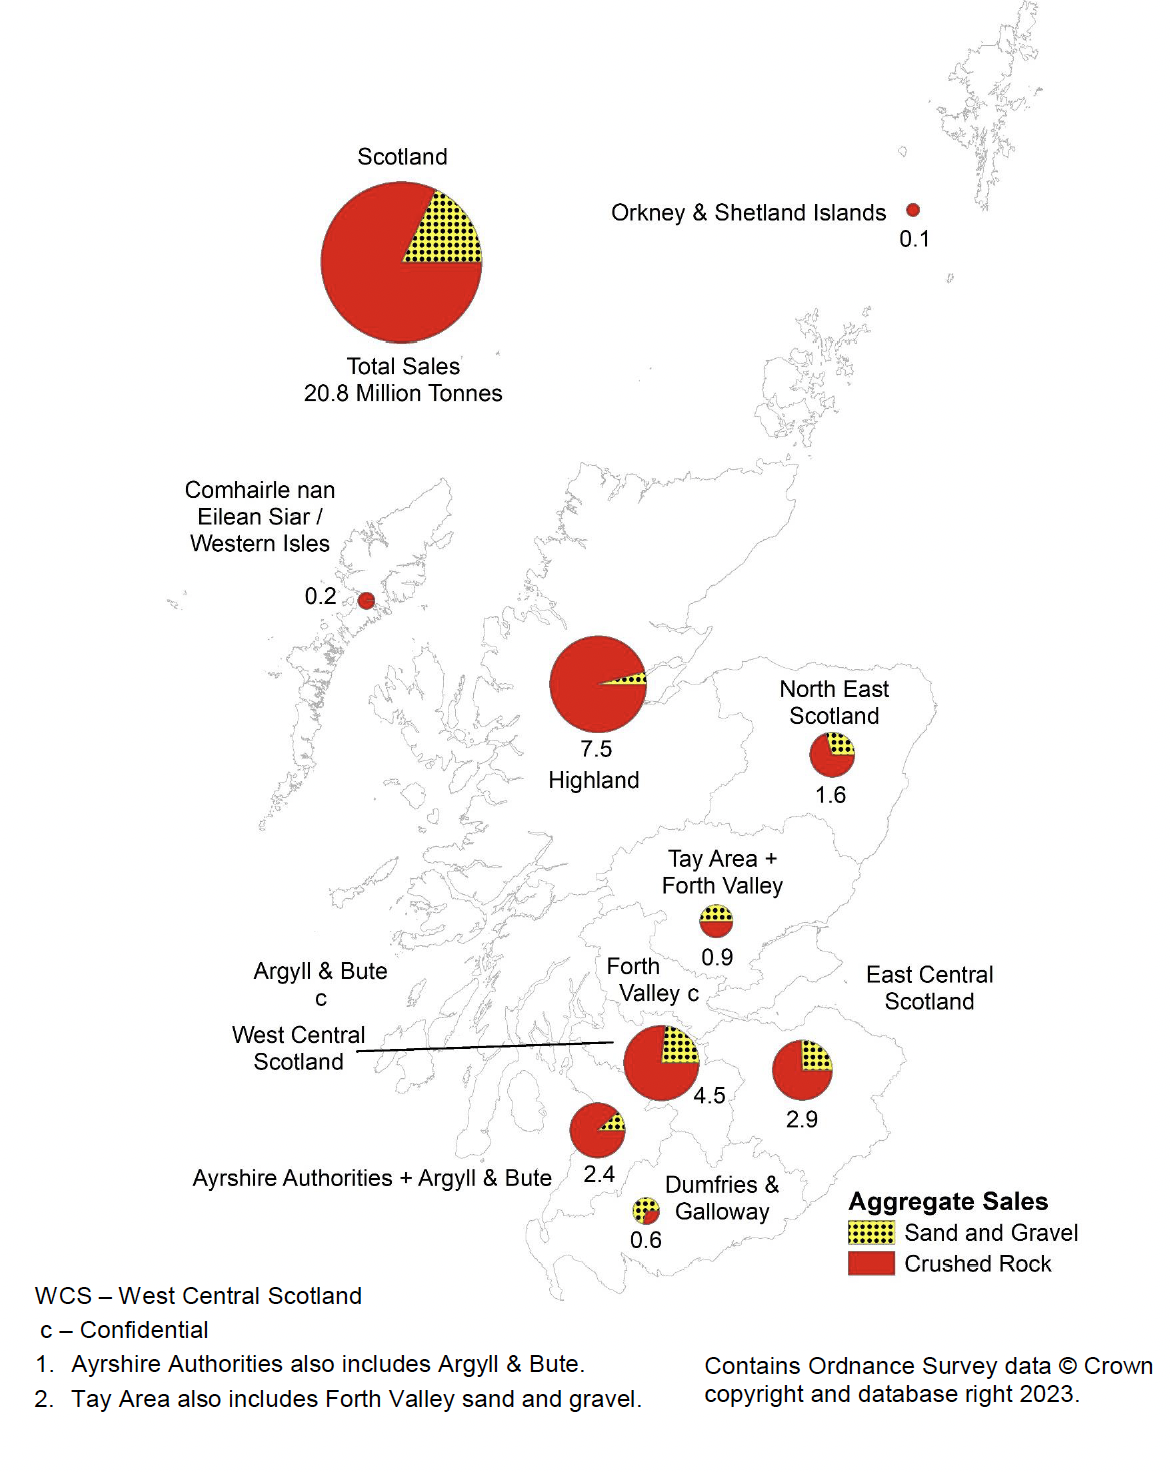 Map showing sales of sand and gravel and crushed rock for primary aggregates 2019 by AM2019 survey region.

Total Sales 20.8 Mt
Orkney and Shetland 0.1 Mt 
Comhairle nan Eilean Siar/Western Isles 0.2 Mt 
Highland 7.5 Mt 
North East Scotland 1.6 Mt 
Tay Area and Forth valley 0.9 Mt 
East Central Scotland 2.9 Mt 
West Central Scotland 4.5 Mt 
Dumfries and Galloway 0.6 Mt 
Ayrshire Authorities and Argyle and   Bute 2.4 Mt.